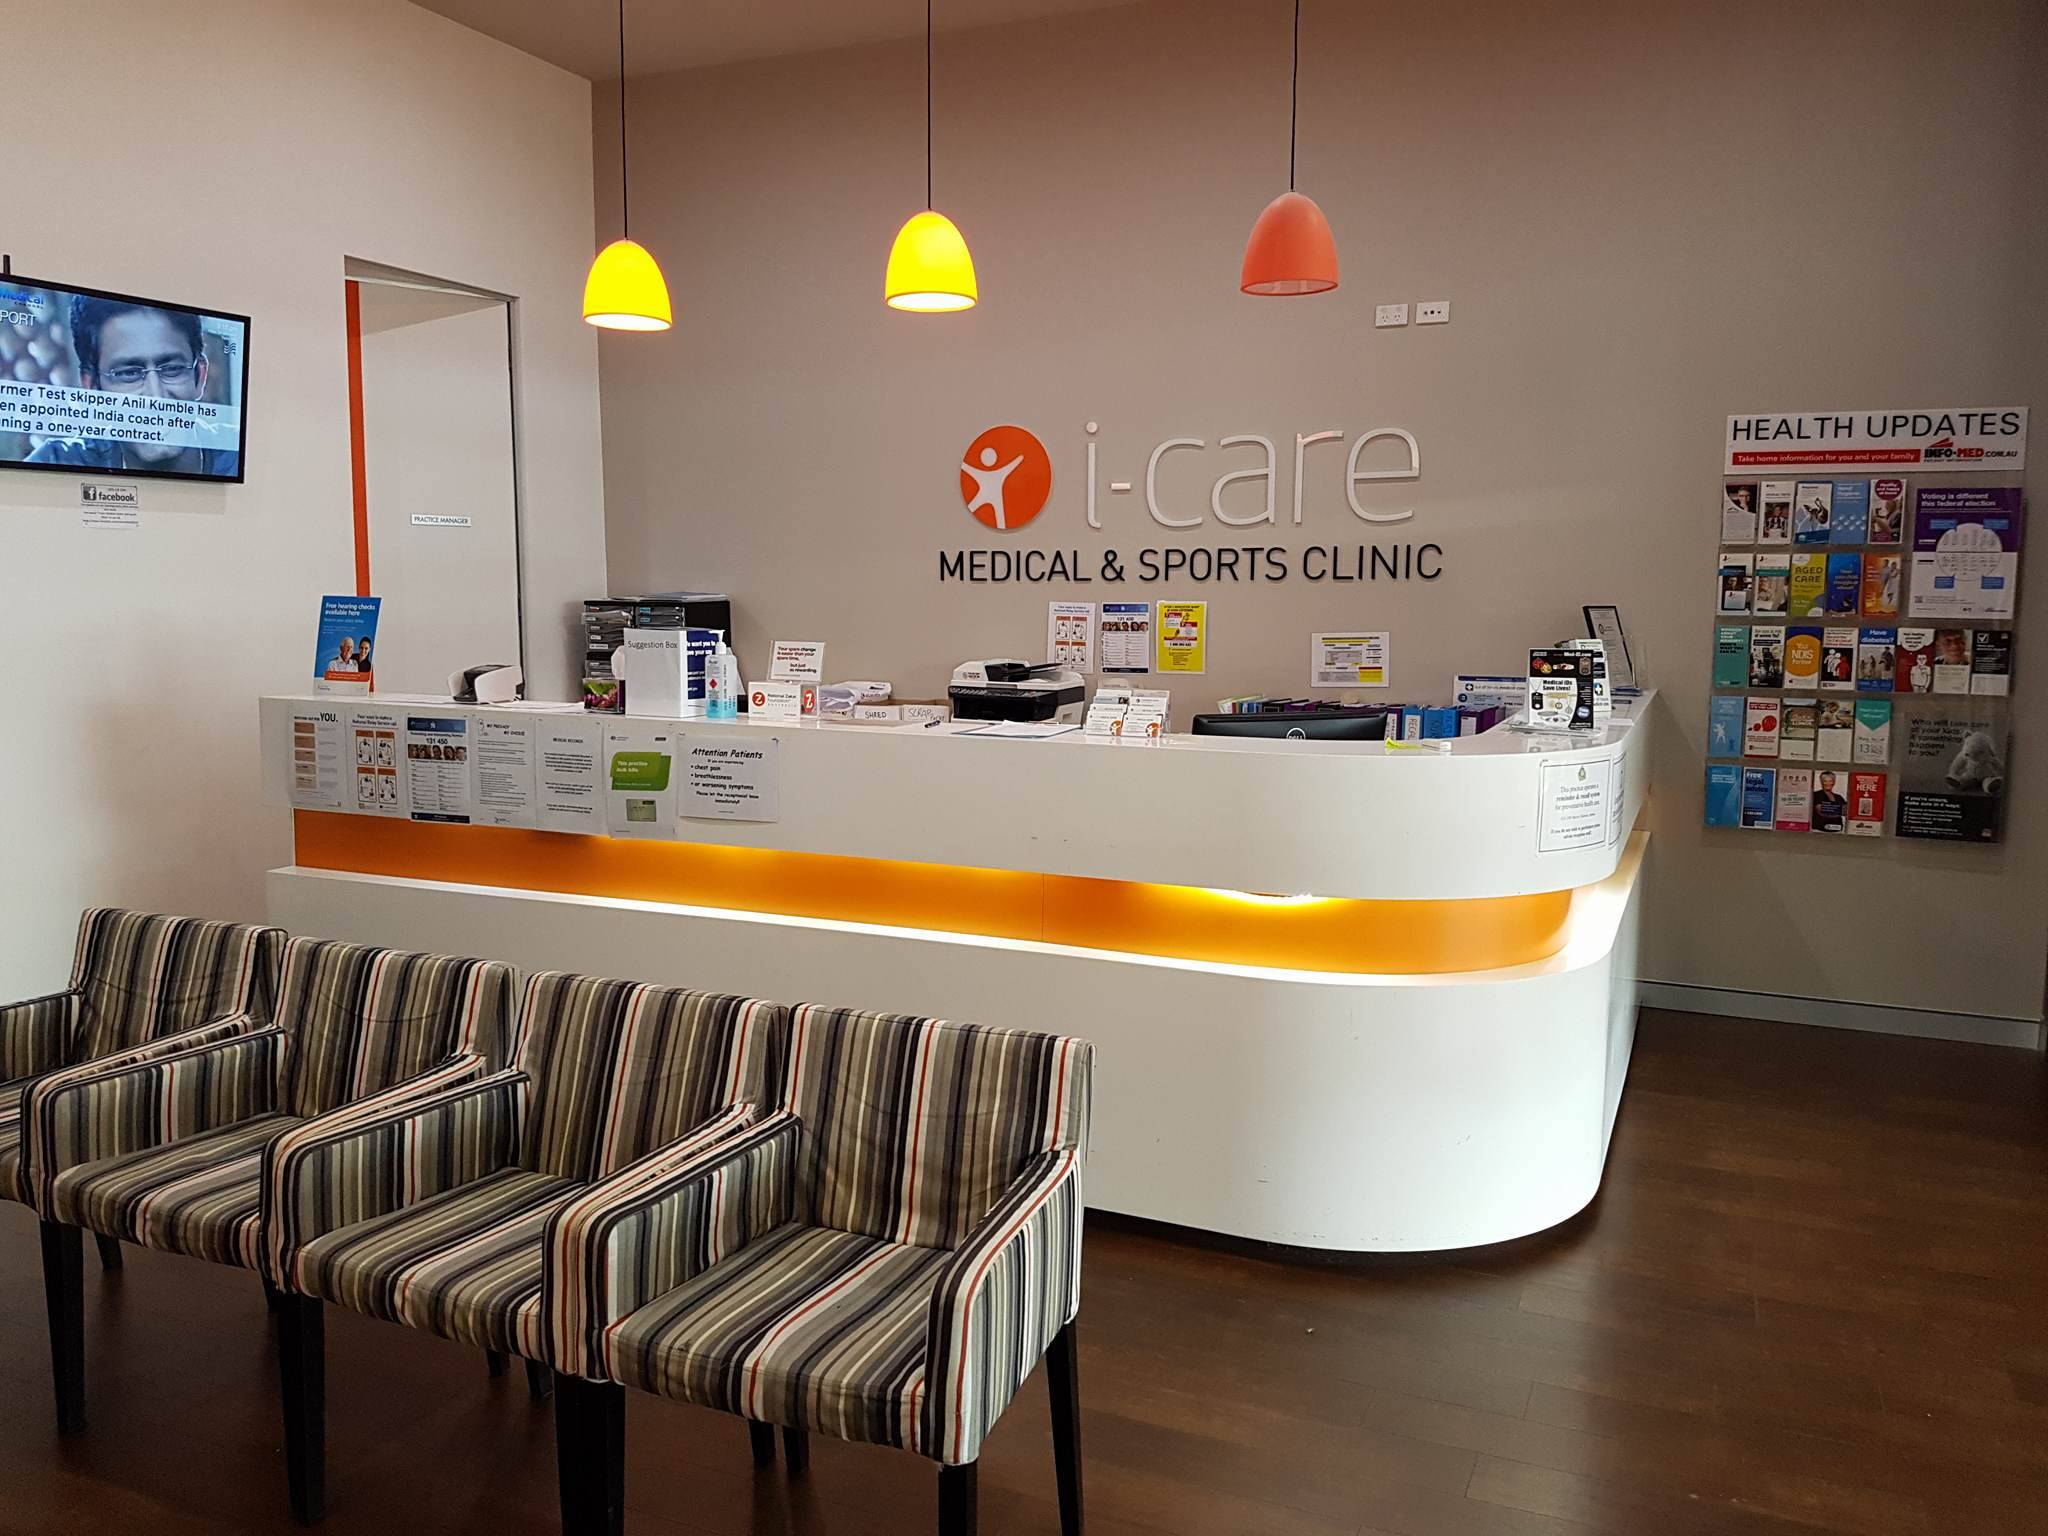 Rooms for Lease – Modern Medical Centre (I-care Medical Centre) in Shopping Centre